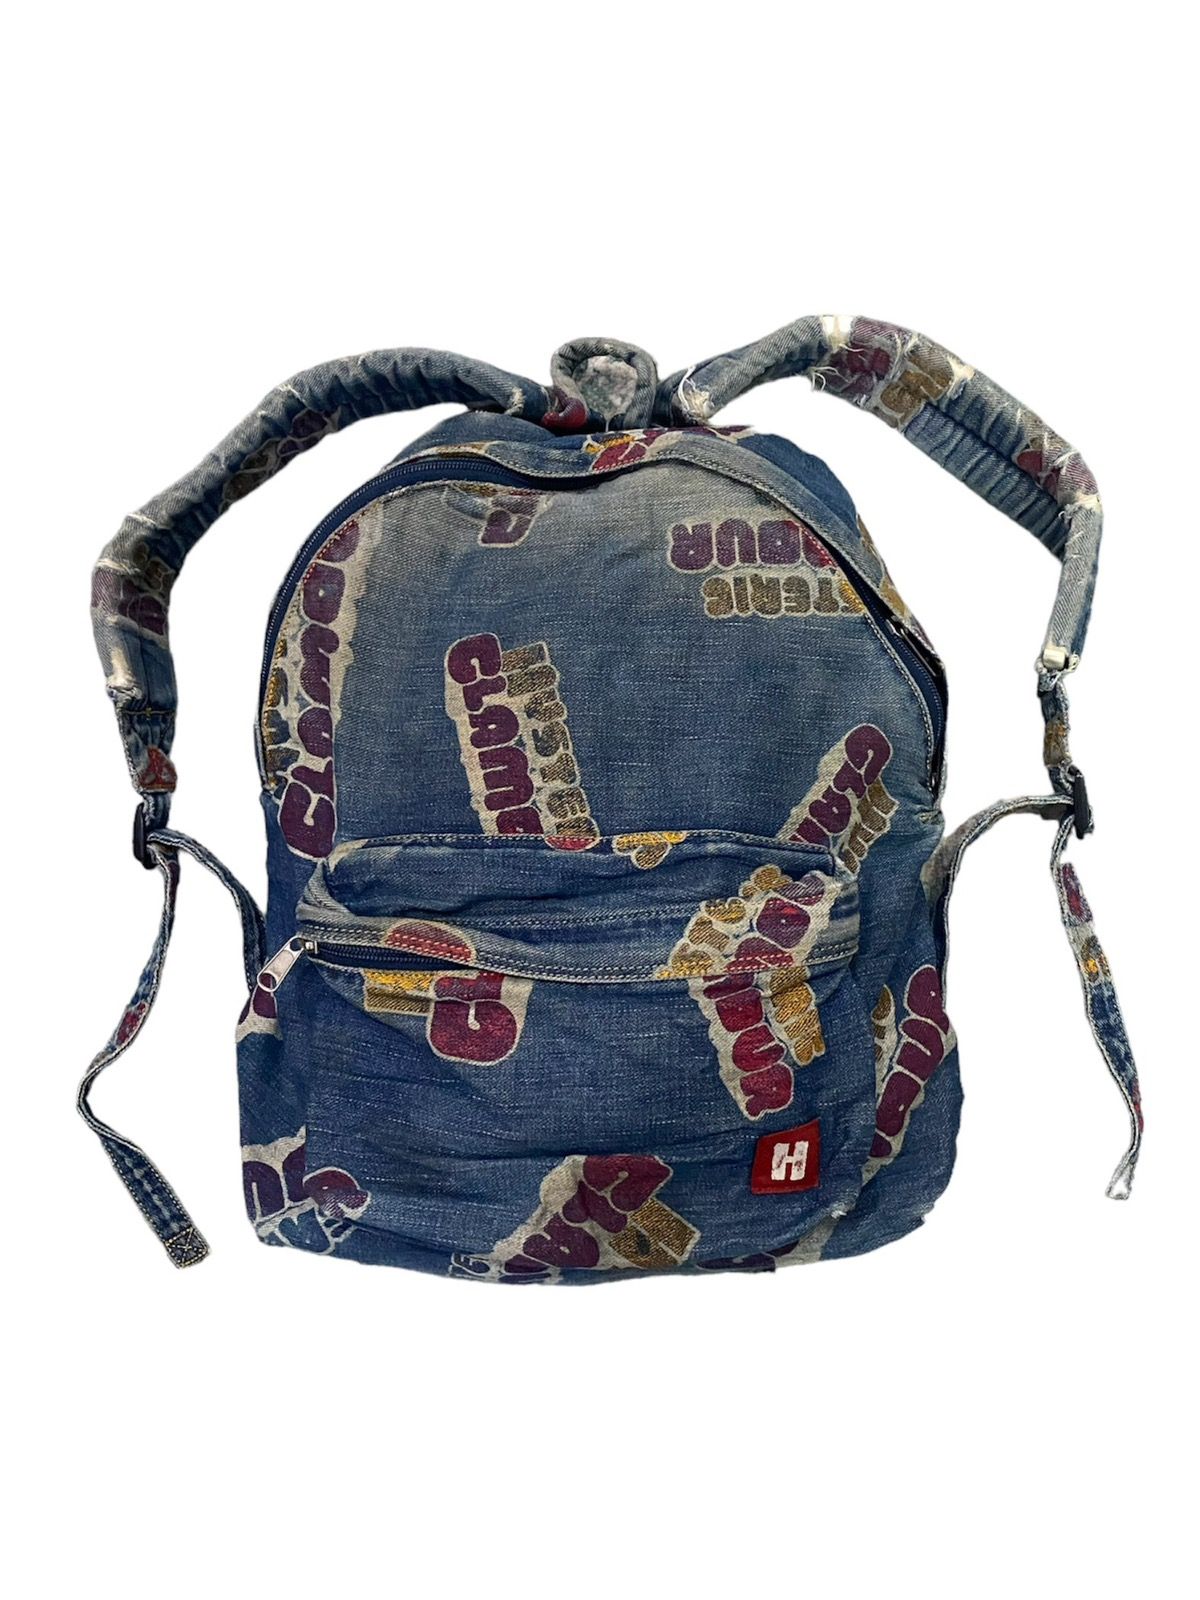 Hysteric Glamour Printed Distressed Denim Backpack - 1